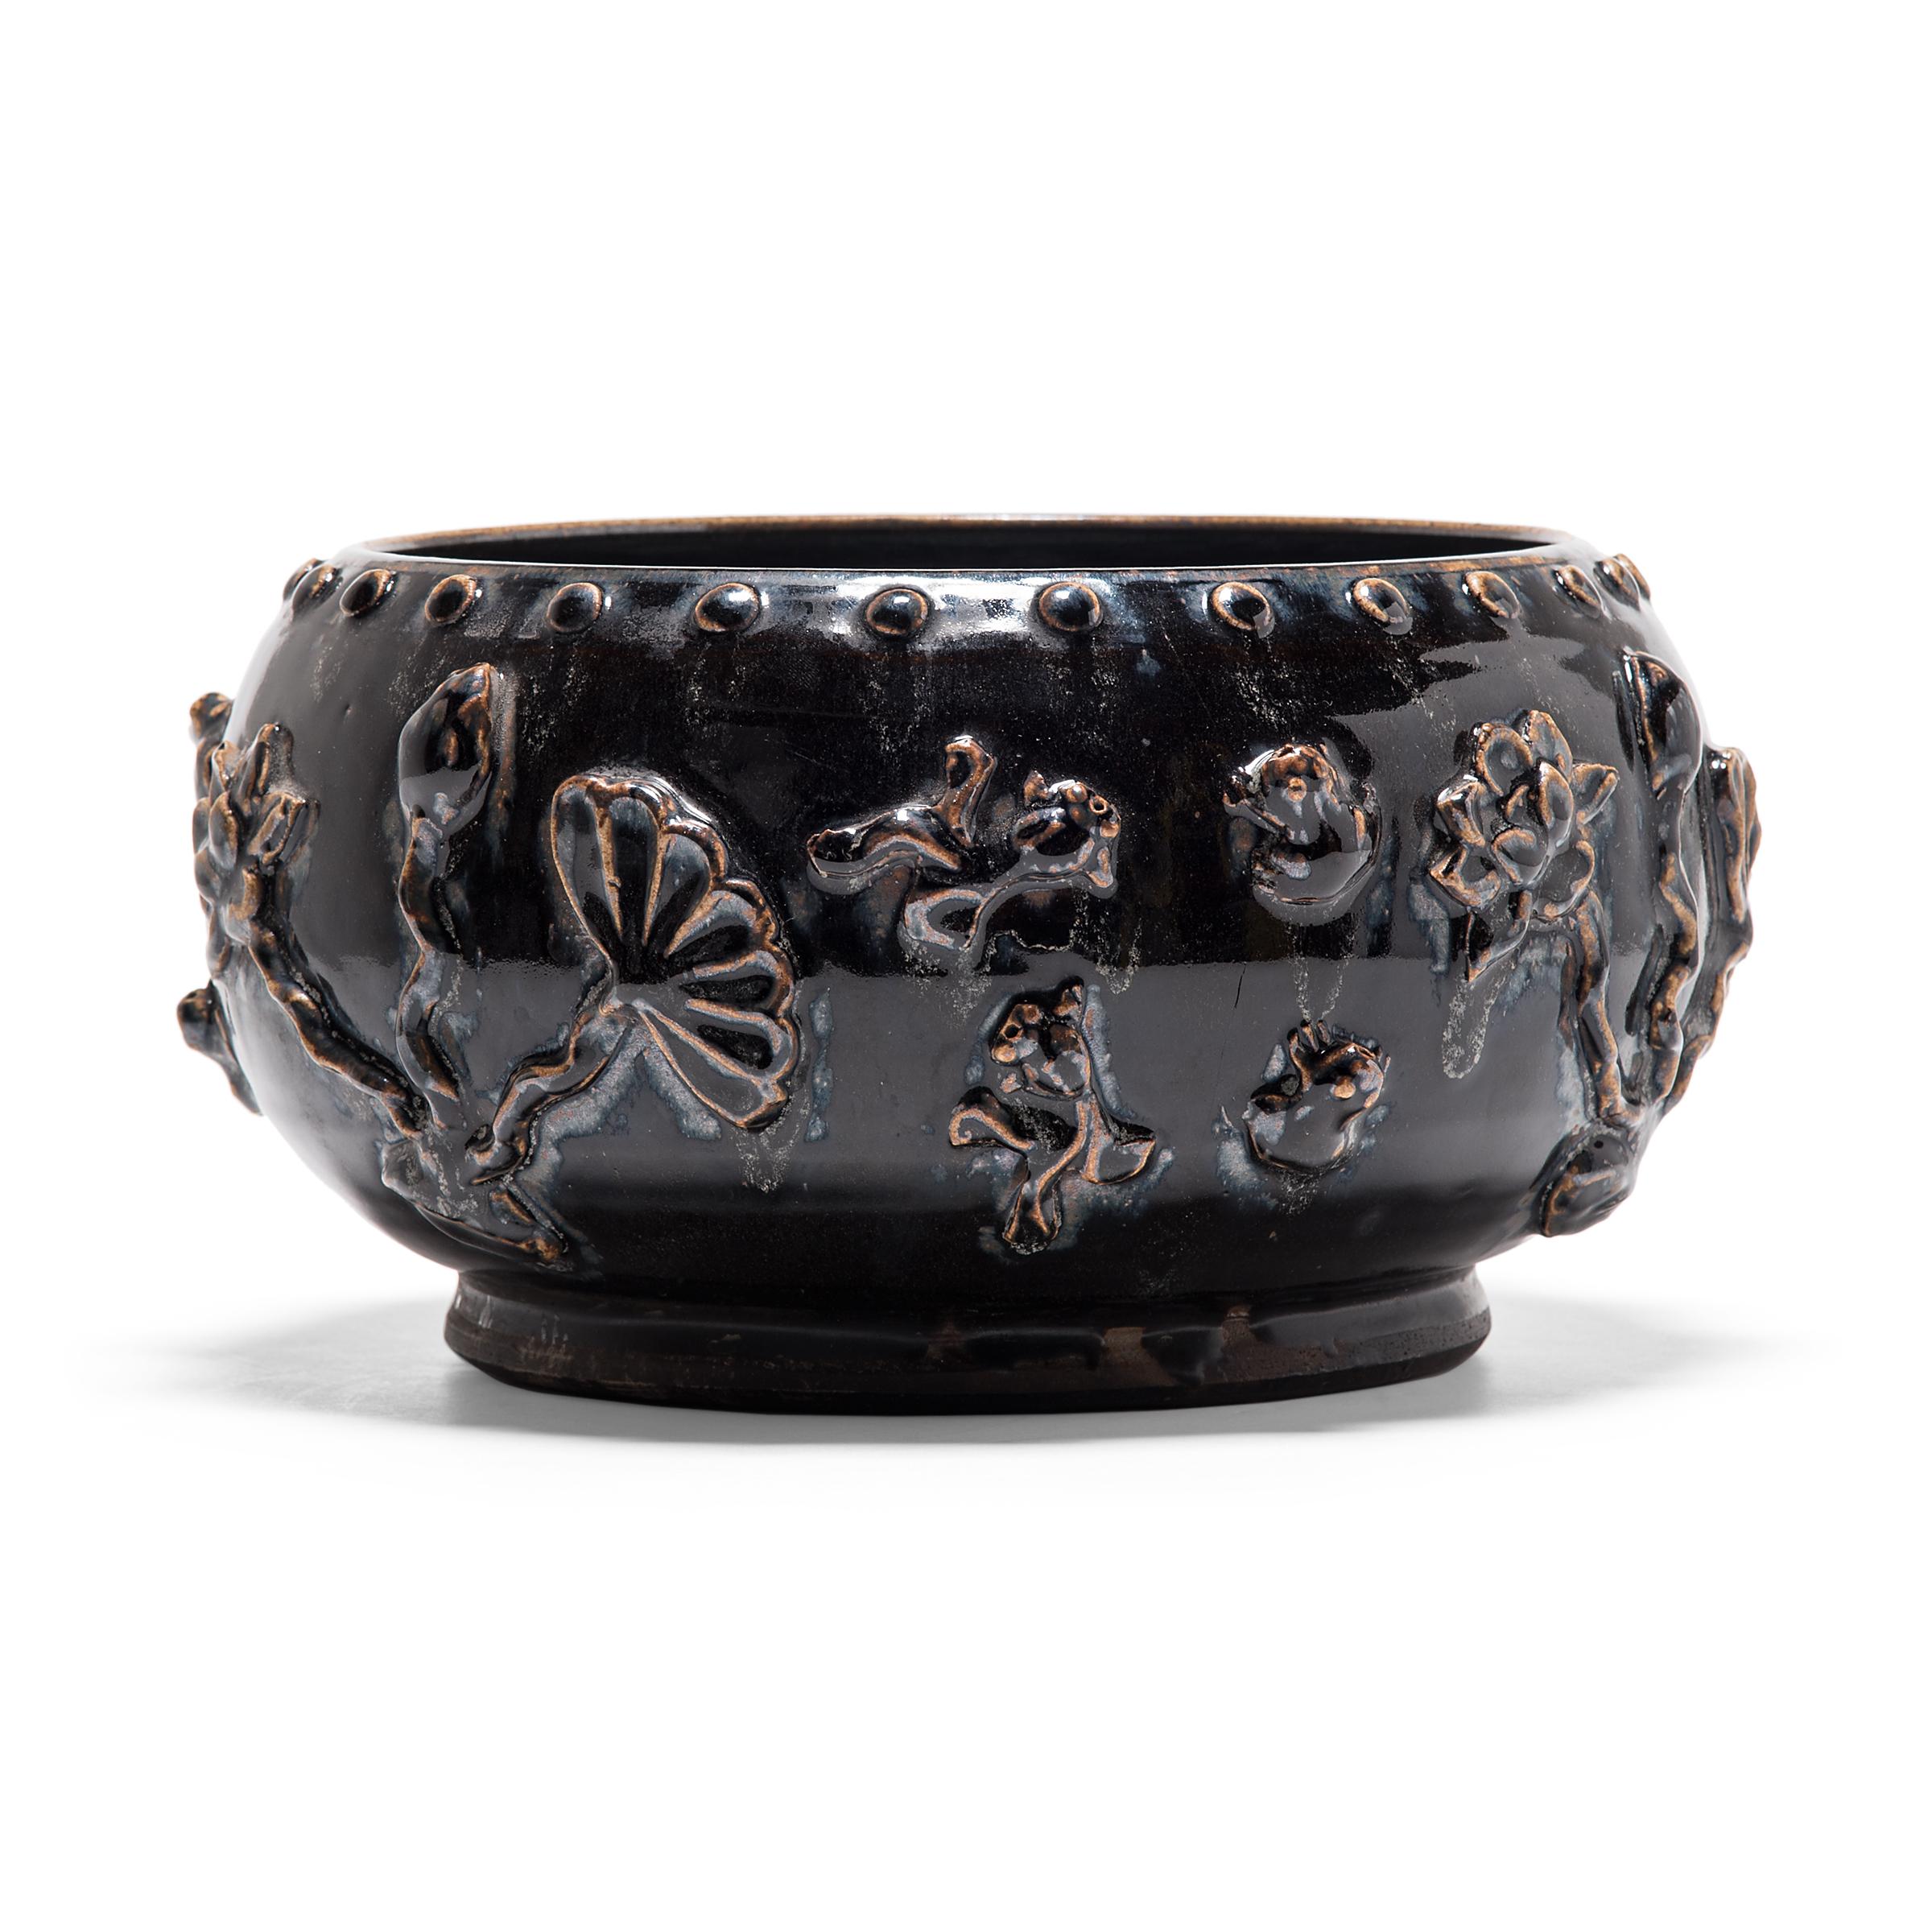 A dark, glossy glaze sheets, pools, and drips down the surface of this squat early 20th century vessel, lingering beautifully on every imperfection. Sculpted in China's Shanxi province, the footed bowl is patterned with a band of nailhead and